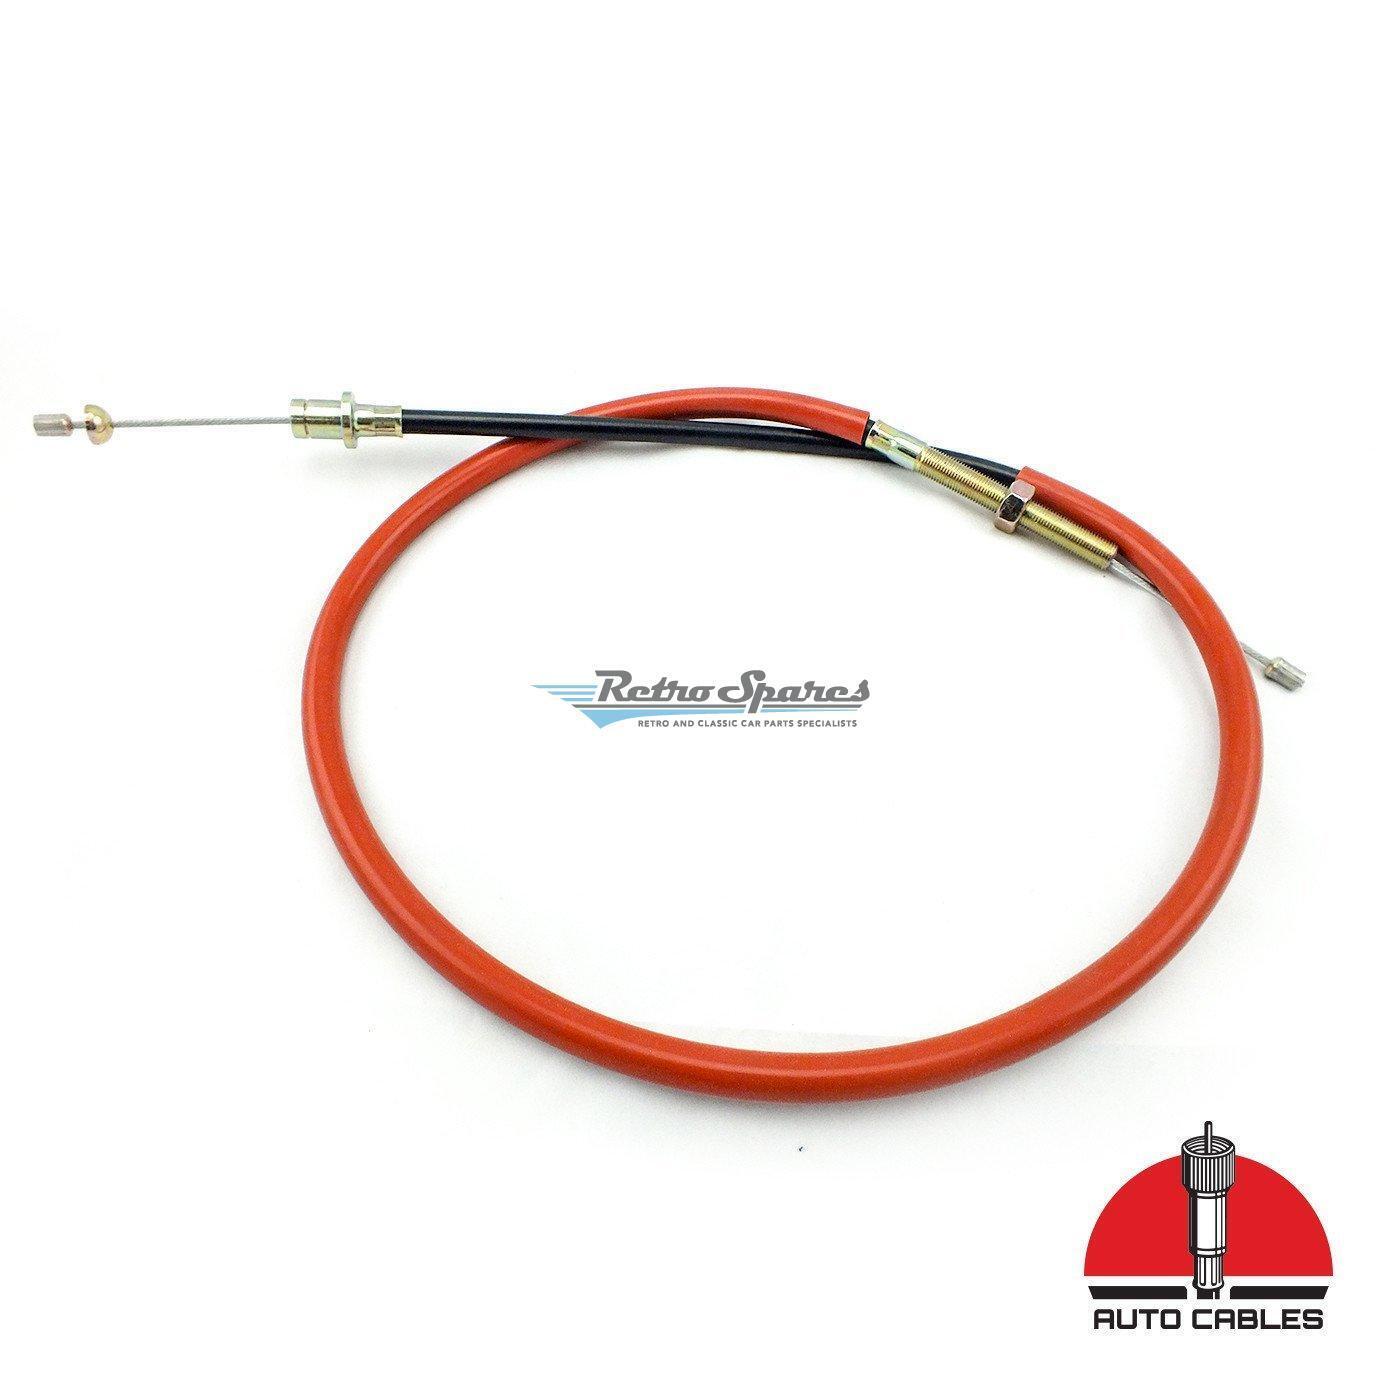 FORD FALCON AU V8 CLUTCH CABLE